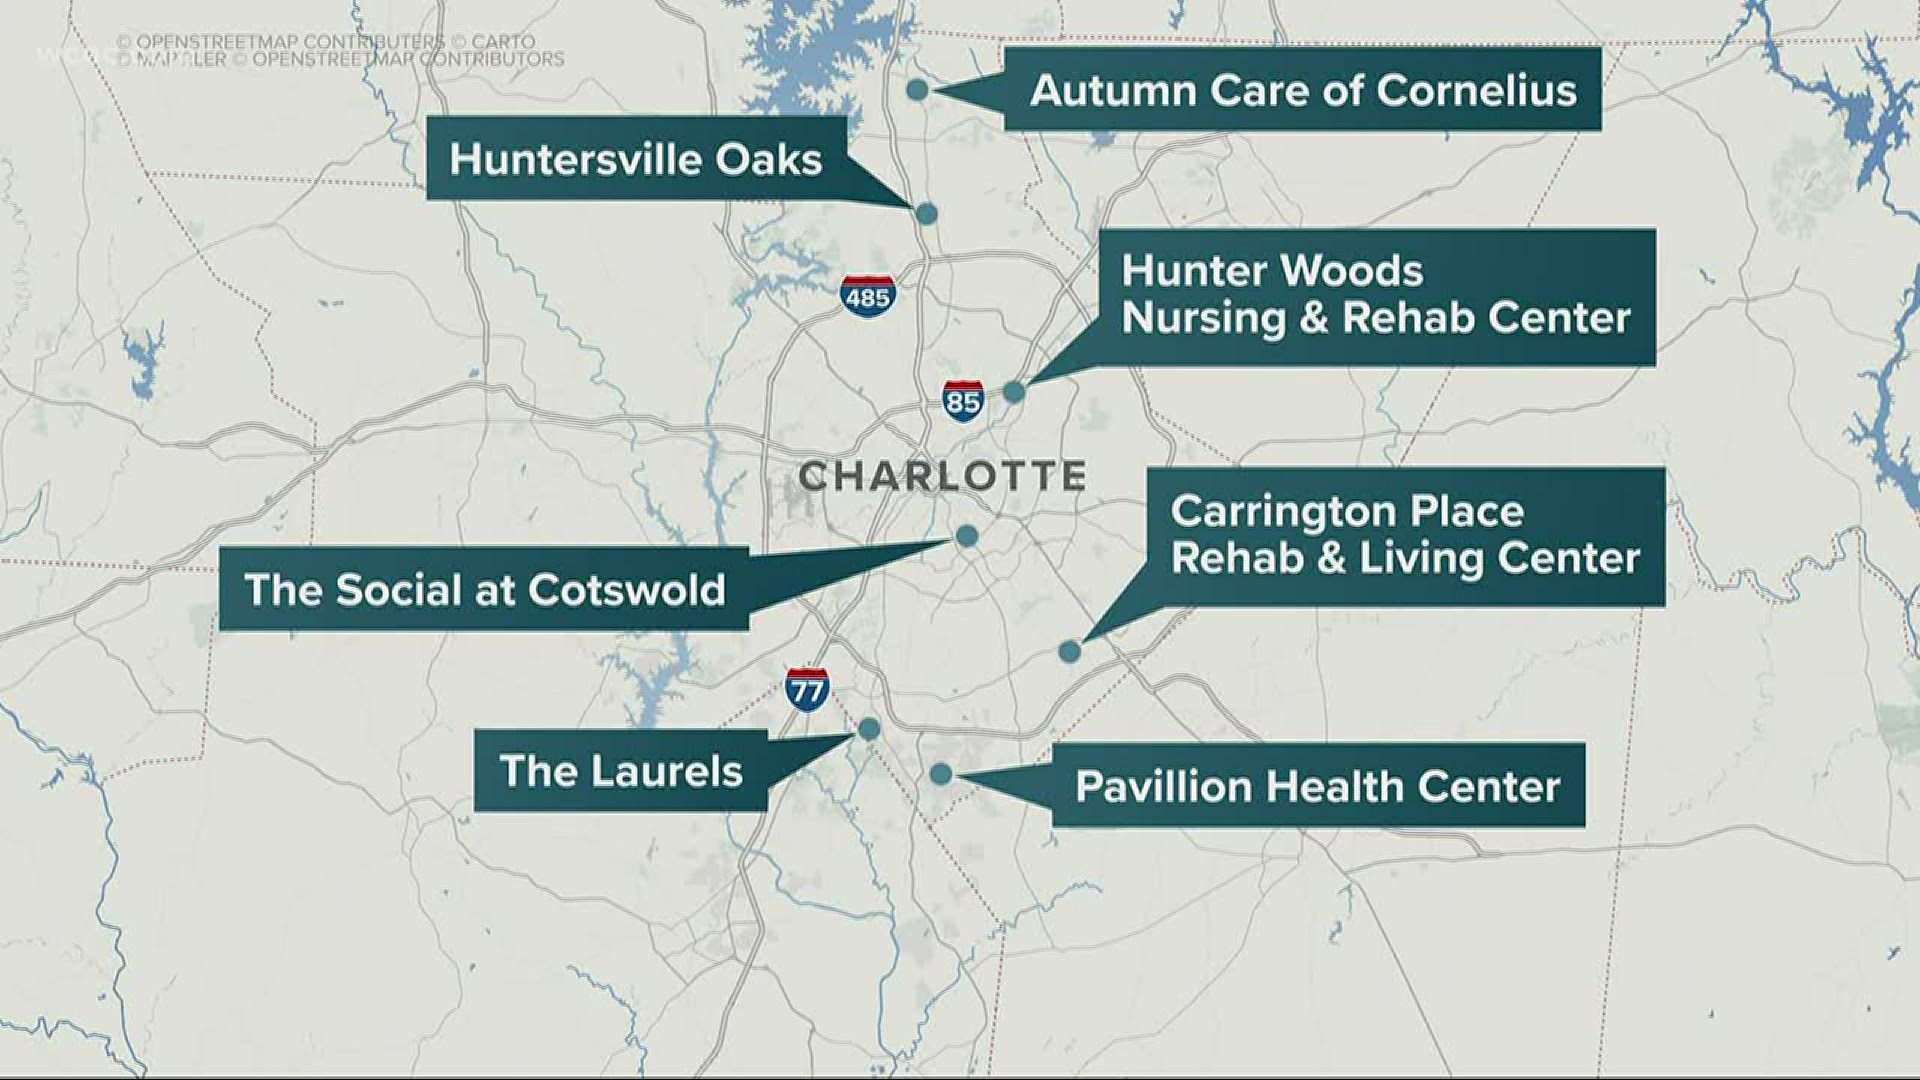 We are talking with a family that is worried about Atrium and Huntersville possibly moving patients to their fathers nursing home.